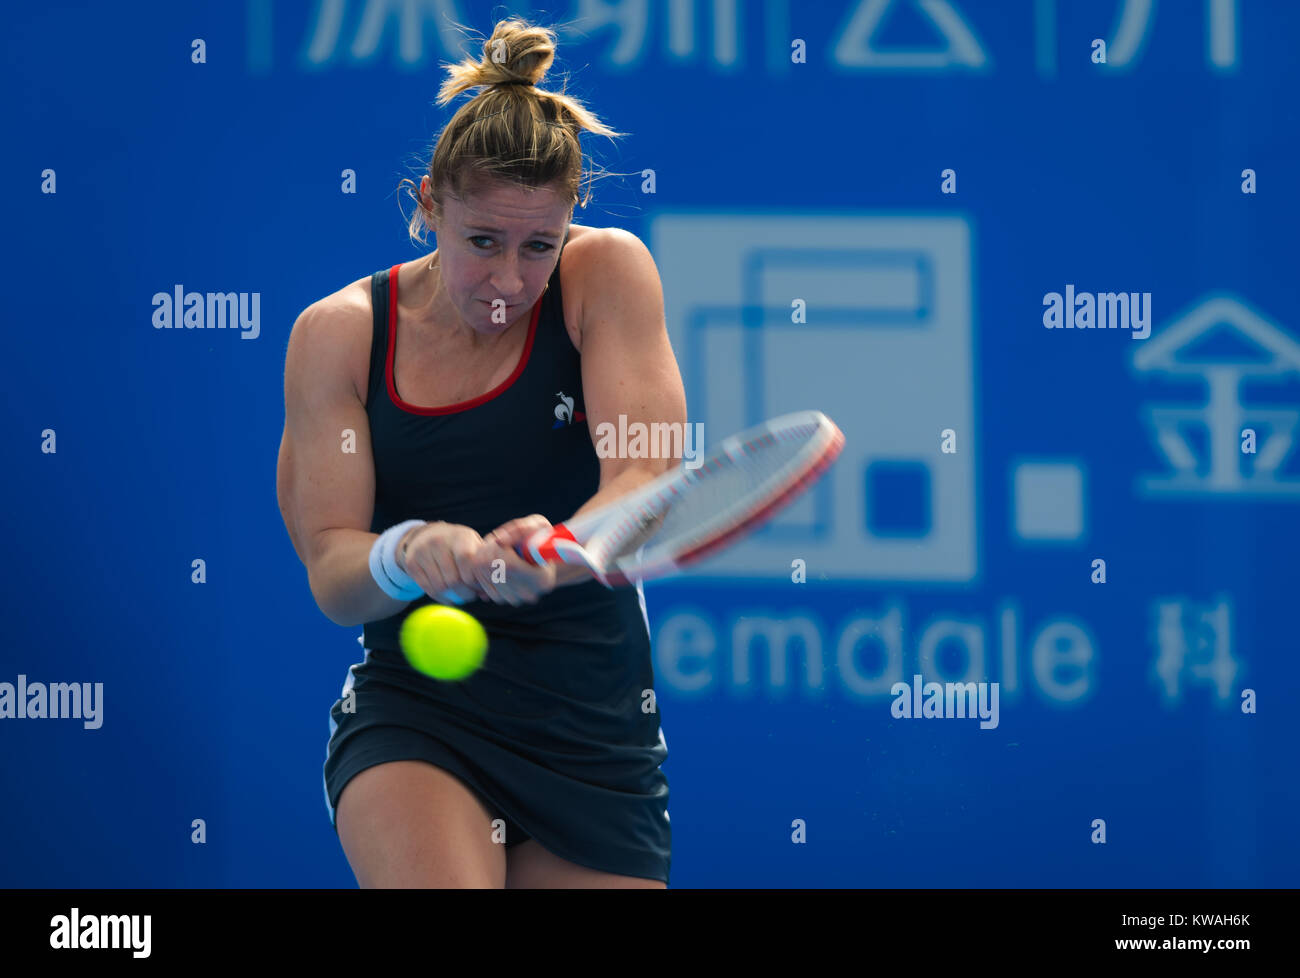 Shenzen, China. 1 January, 2018. Pauline Parmentier of France in action at  the 2018 Shenzen Open WTA International tennis tournament © Jimmie48  Photography/Alamy Live News Stock Photo - Alamy